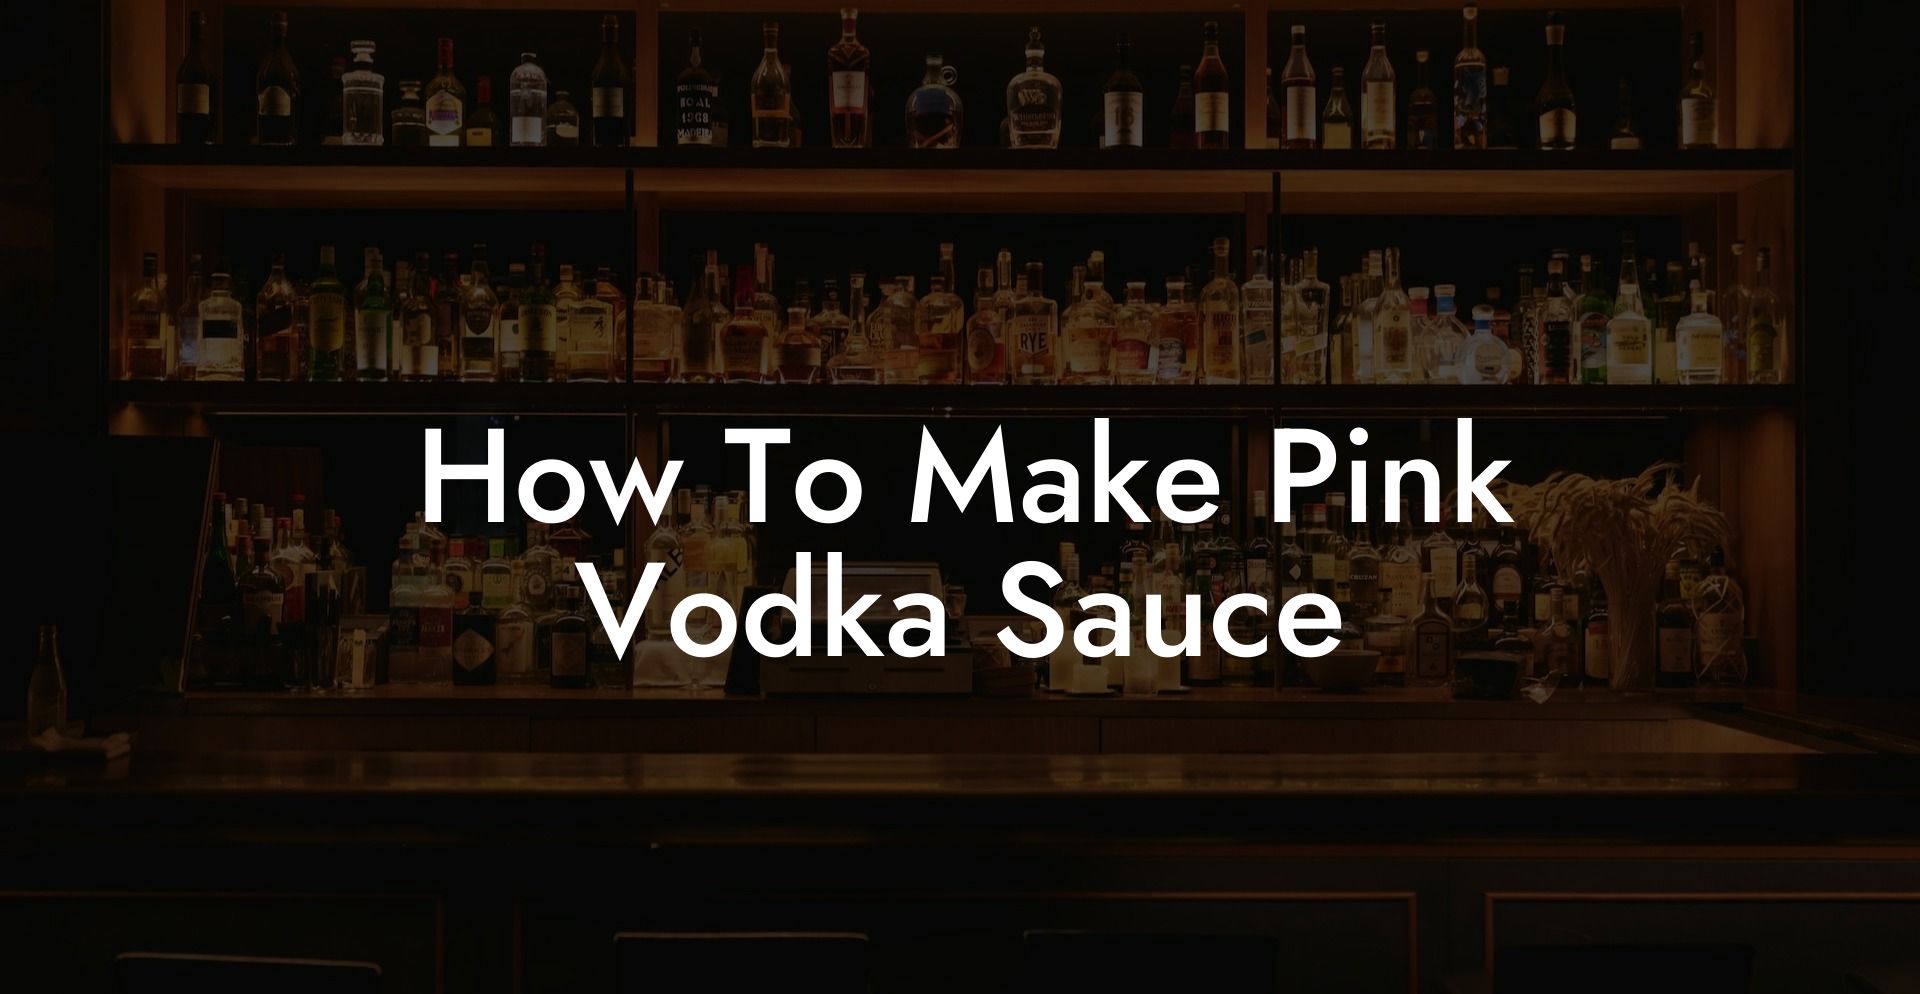 How To Make Pink Vodka Sauce